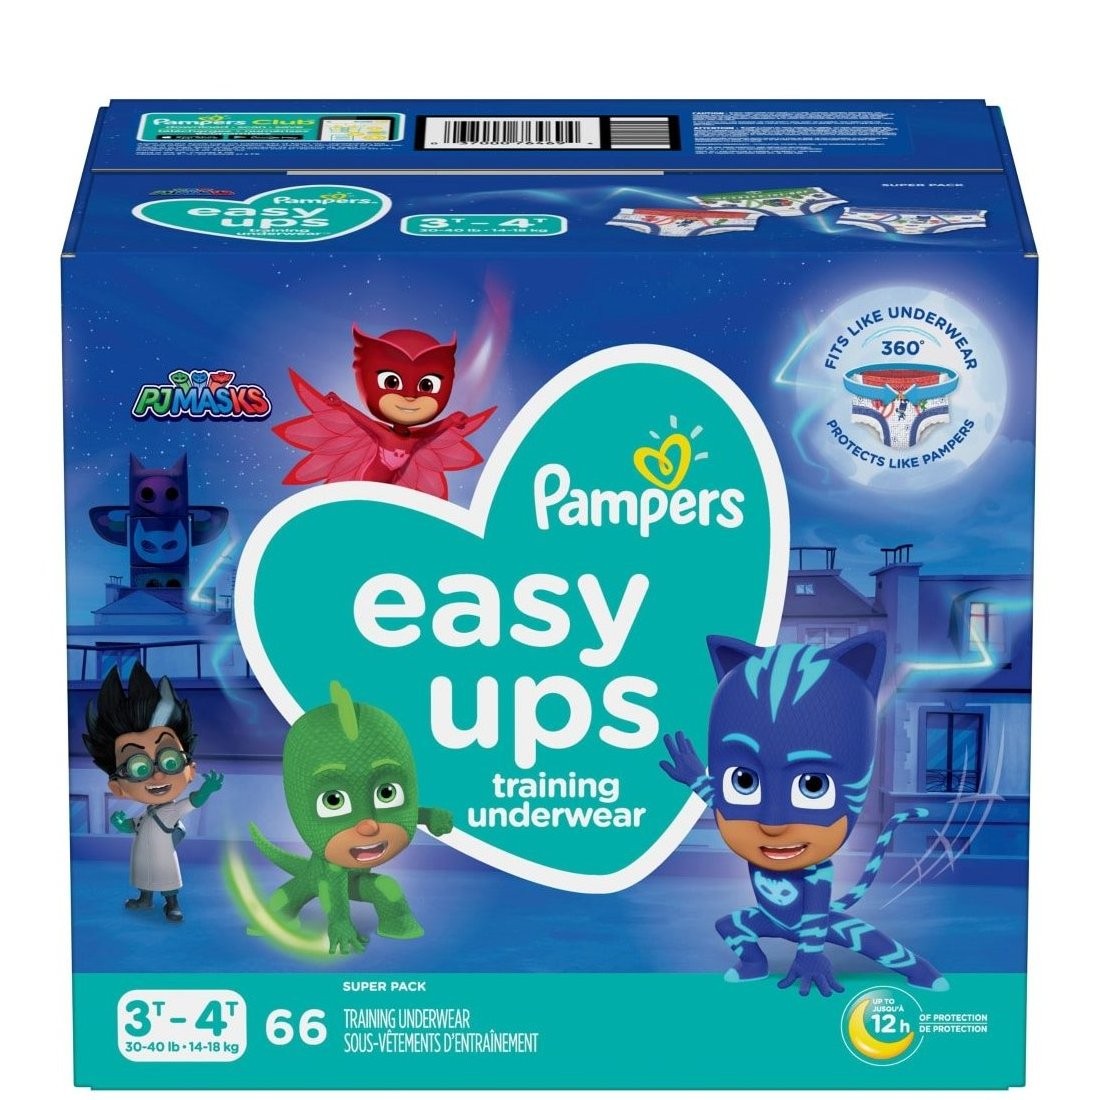 PAMPERS EASY UPS BOYS 3T-4T 66s